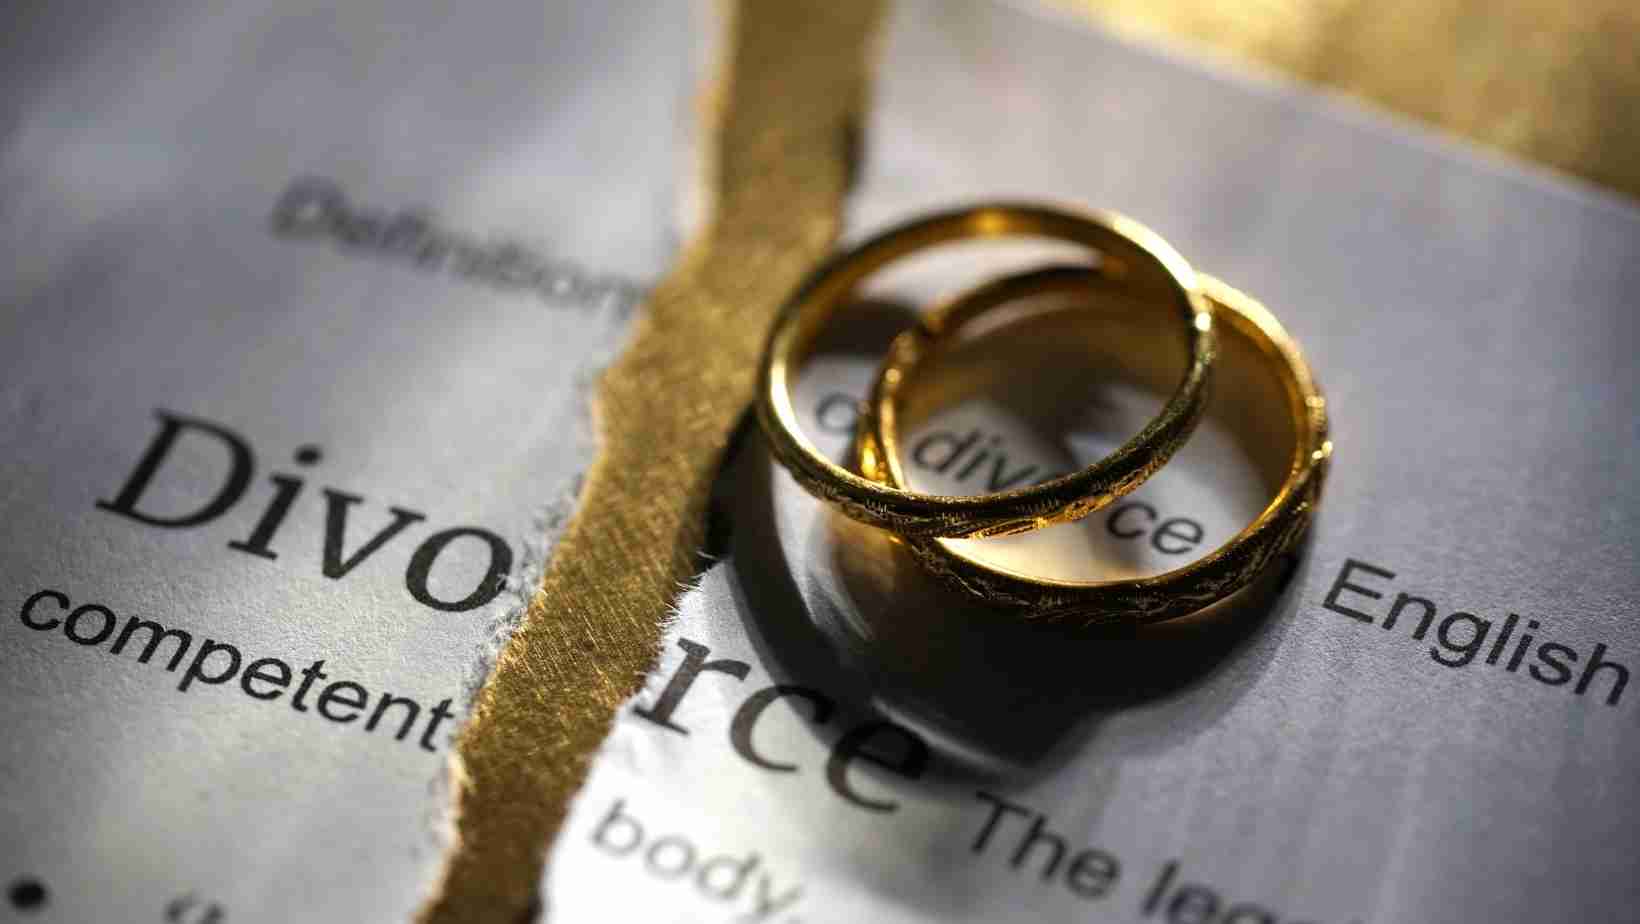 Engagement Rings Kept on divorce papers